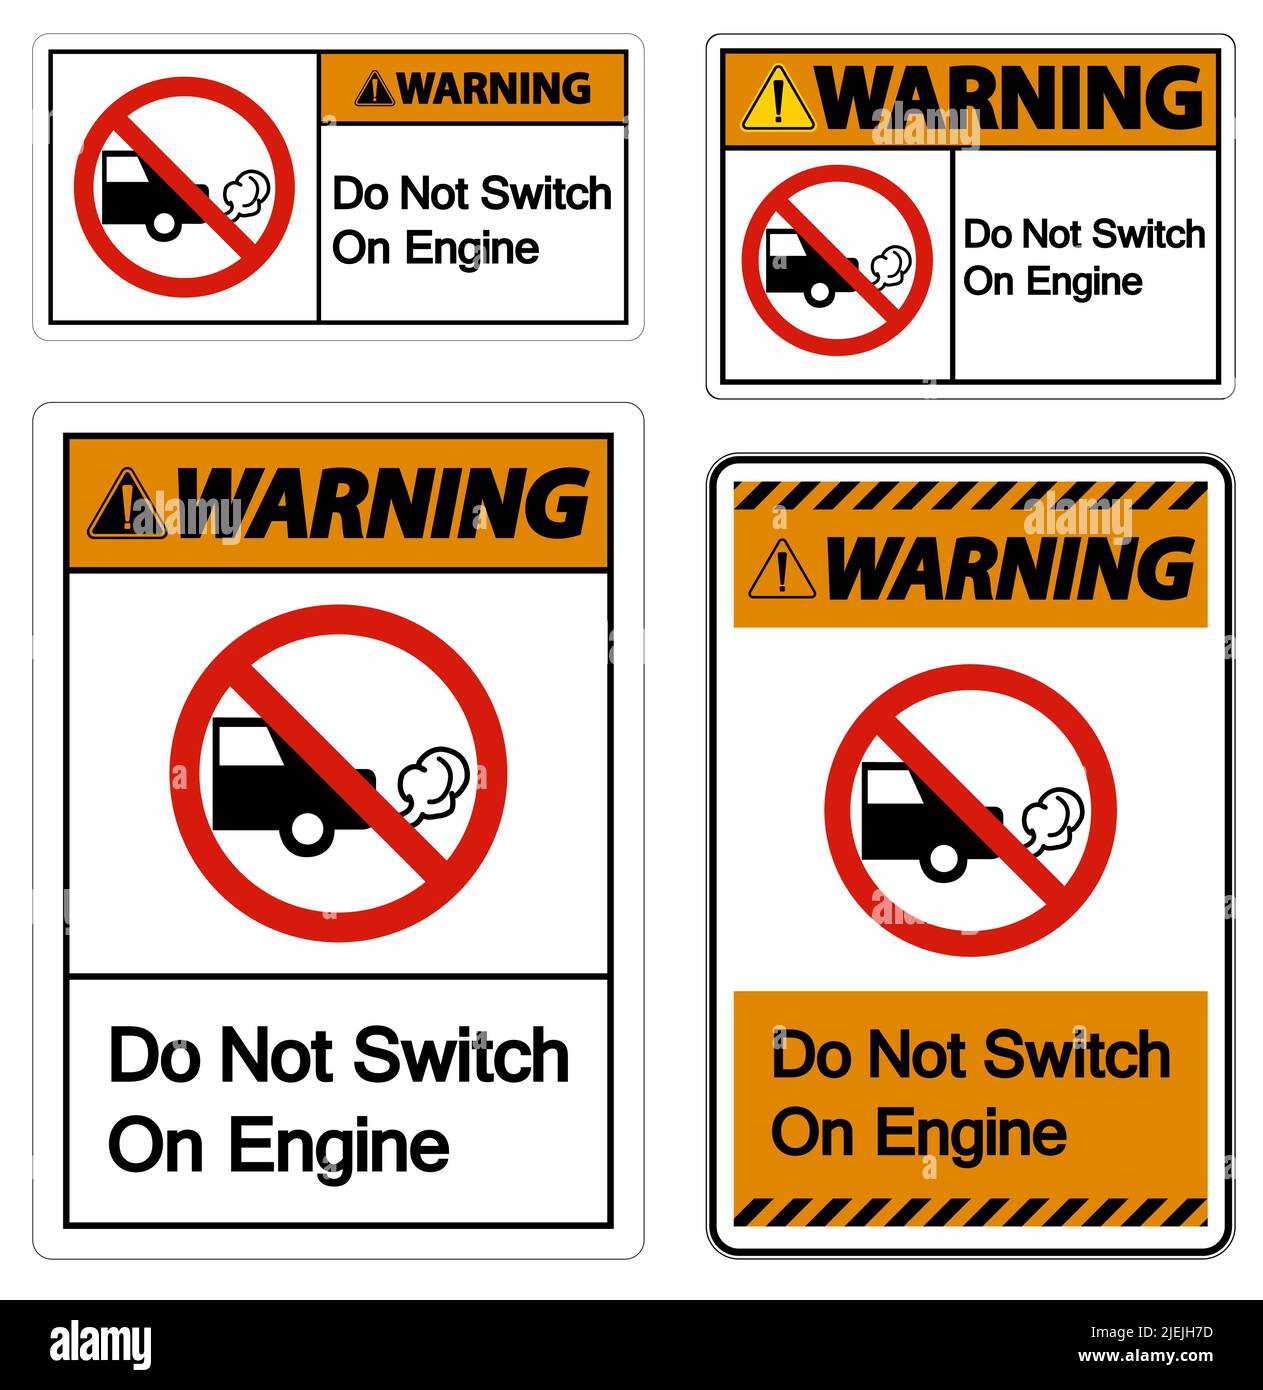 Warning Do Not Switch On Engine Sign On White Background Stock Vector